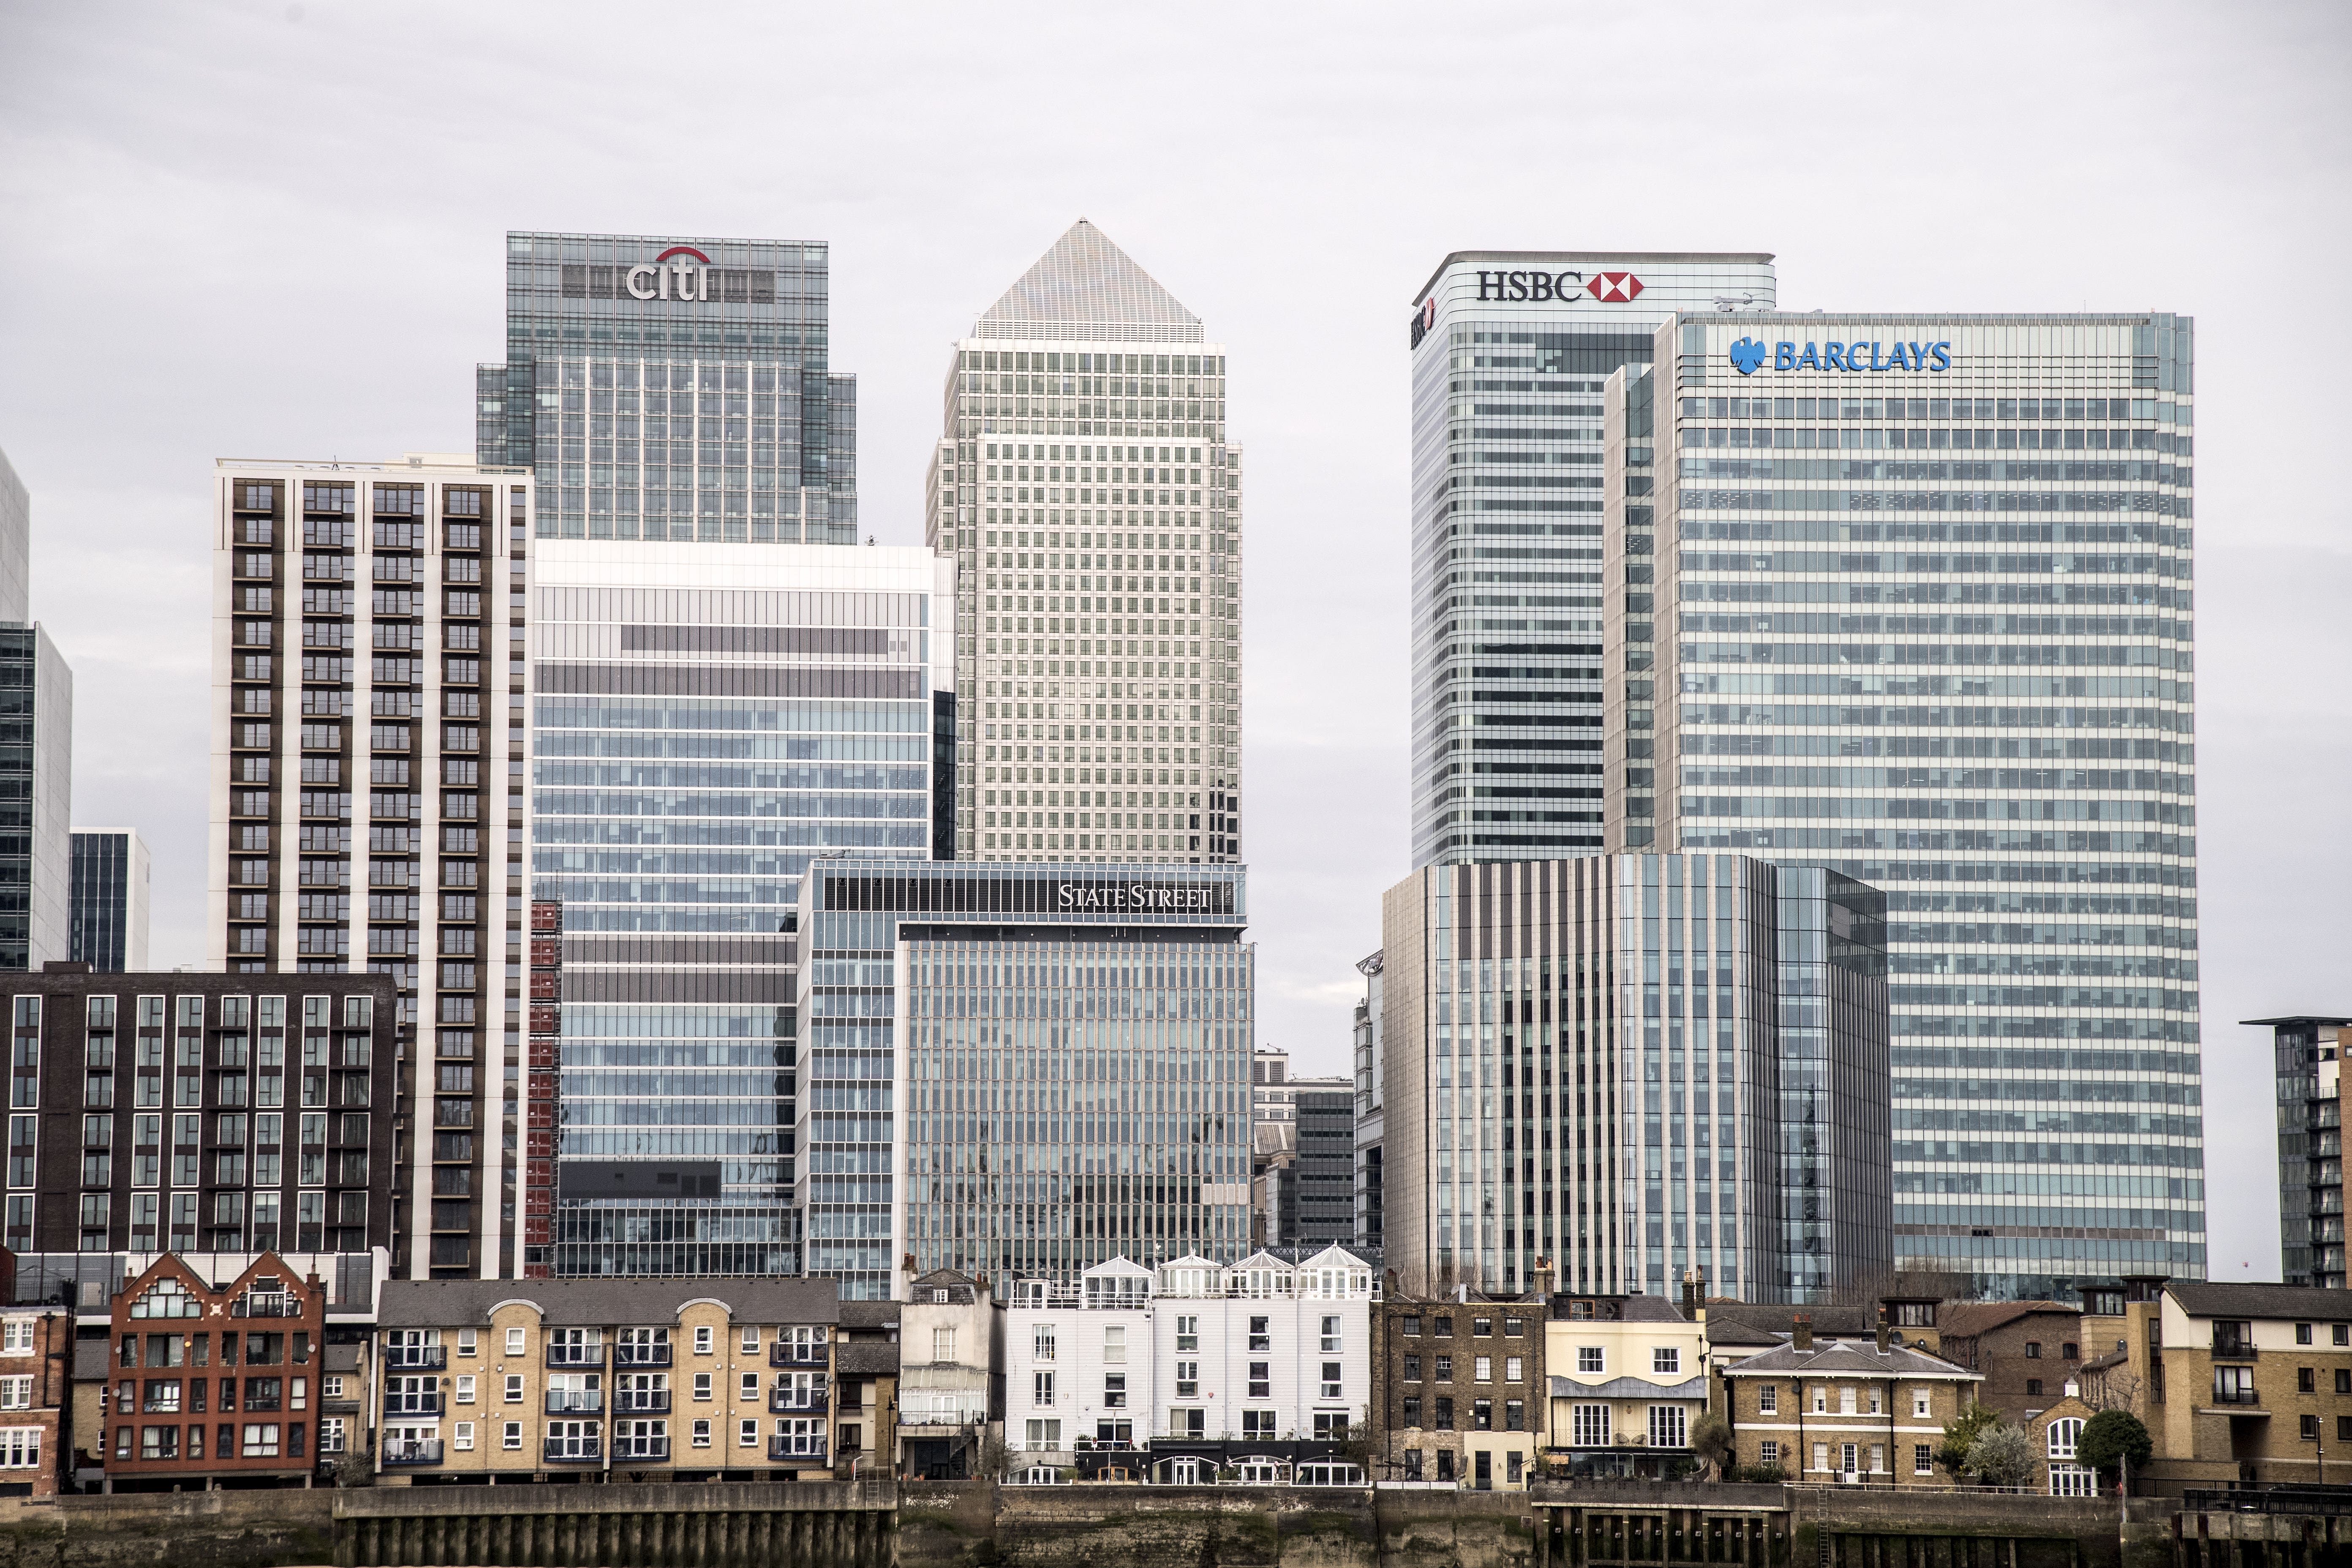 Situated on the banks. Canary Wharf in Winter. Economic London. City Bank uk. Bankers.